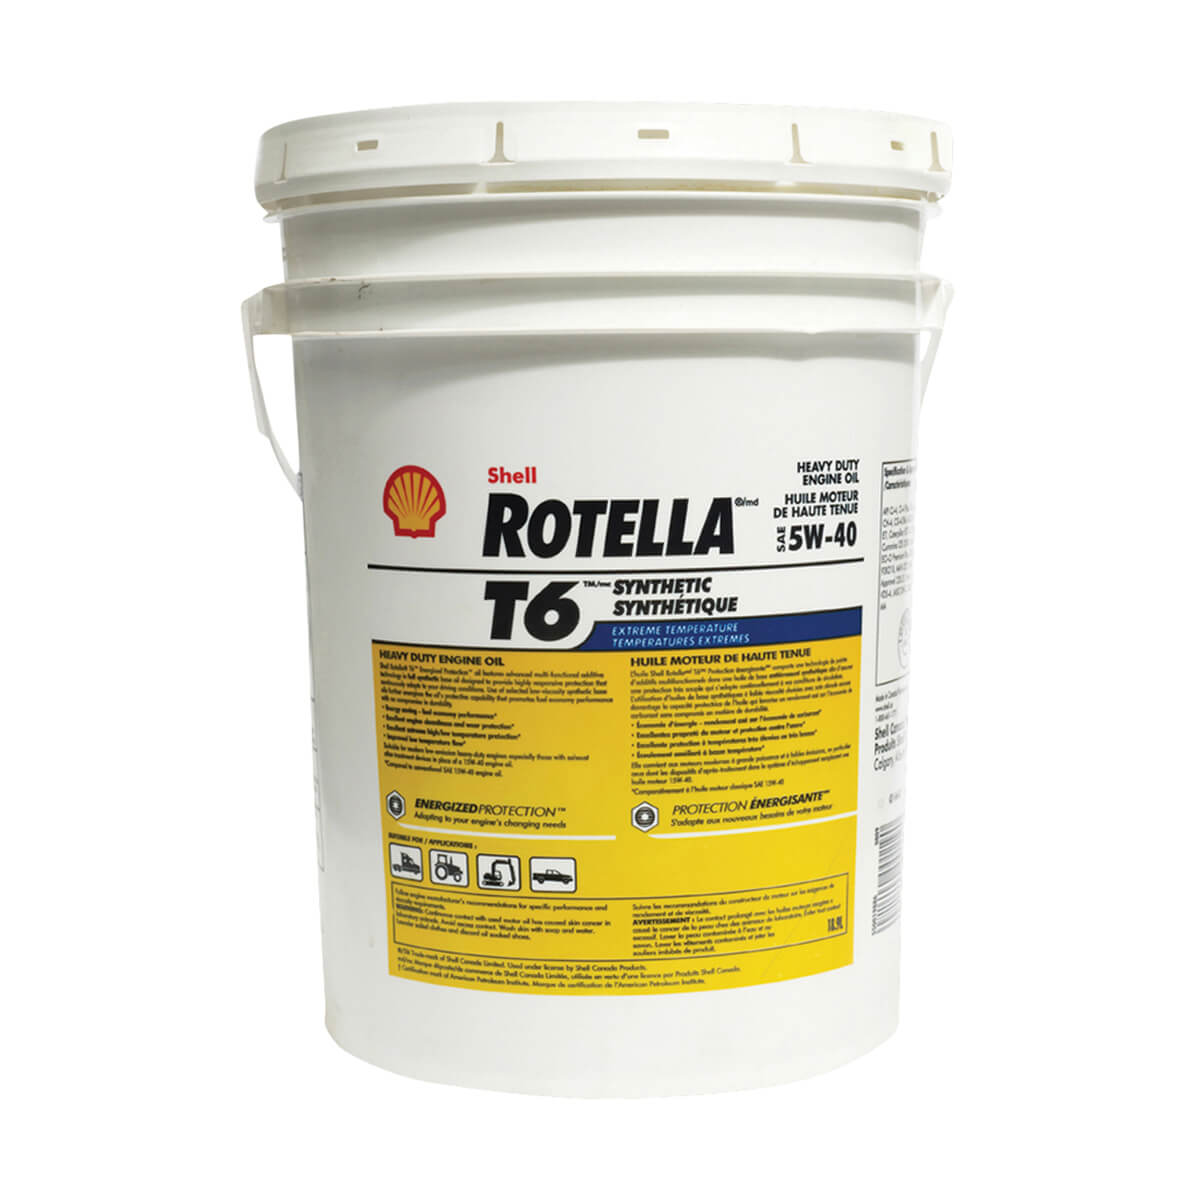 Shell Rotella T6 Triple Protection Synthetic 5W-40 - 18.9 L